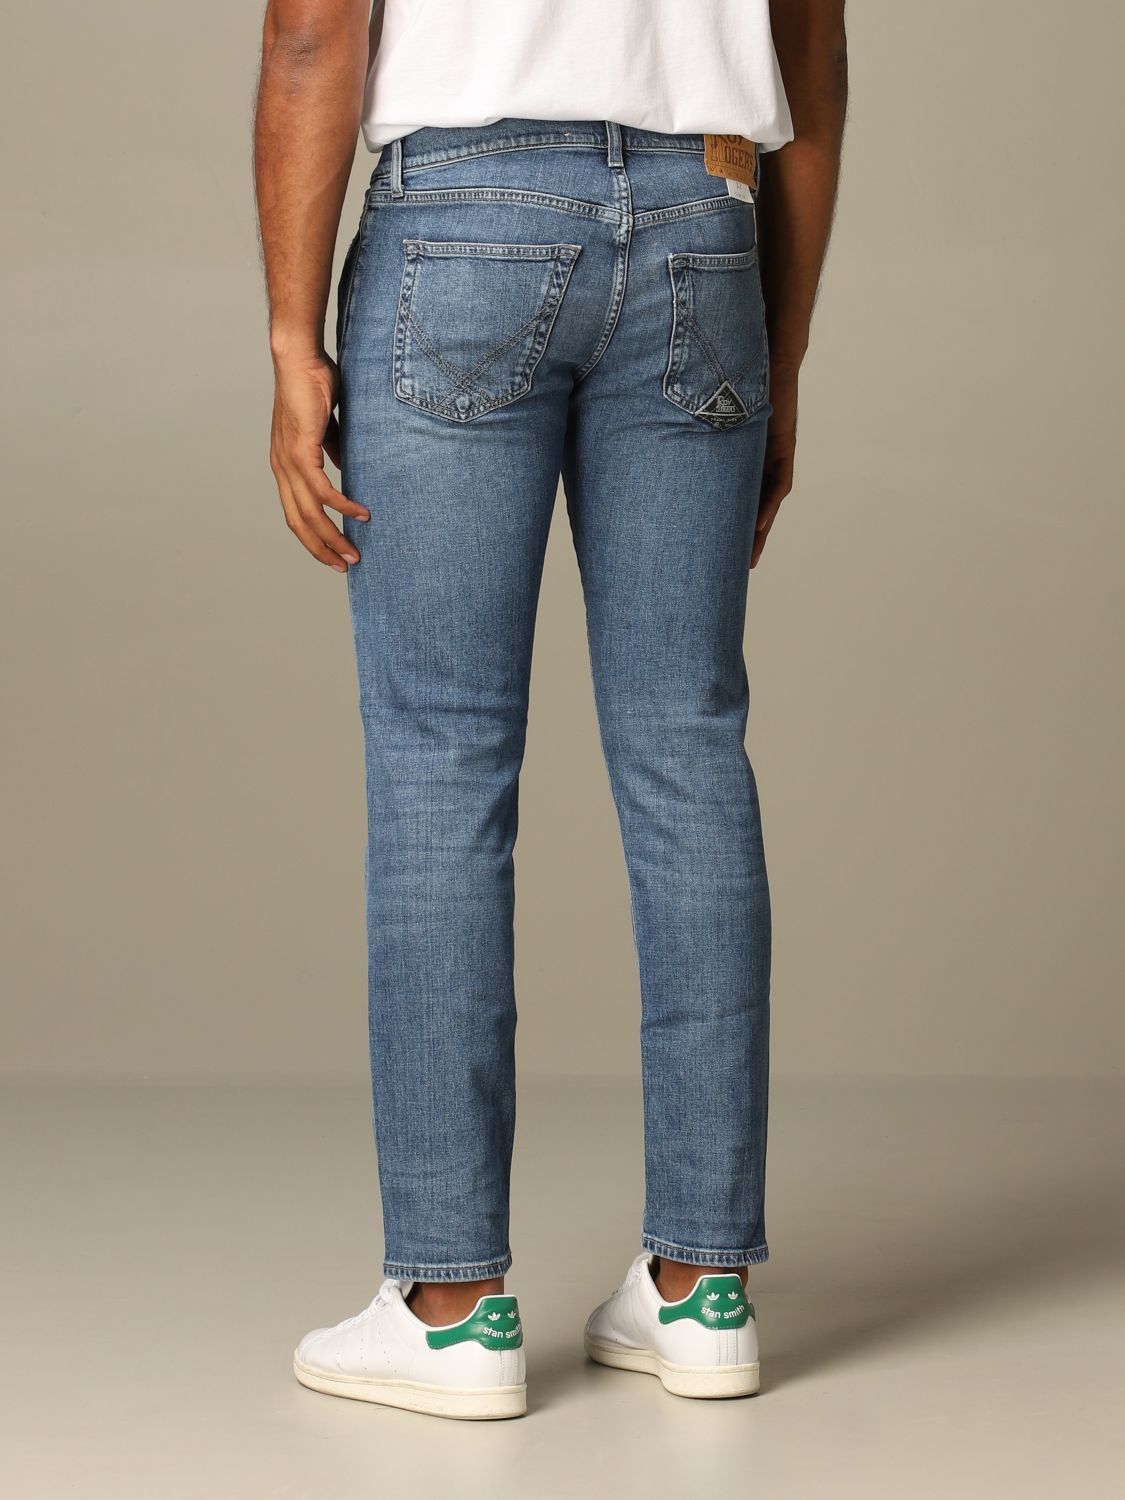 Roy Rogers Outlet: low-rise jeans - Denim | Jeans Roy Rogers ...